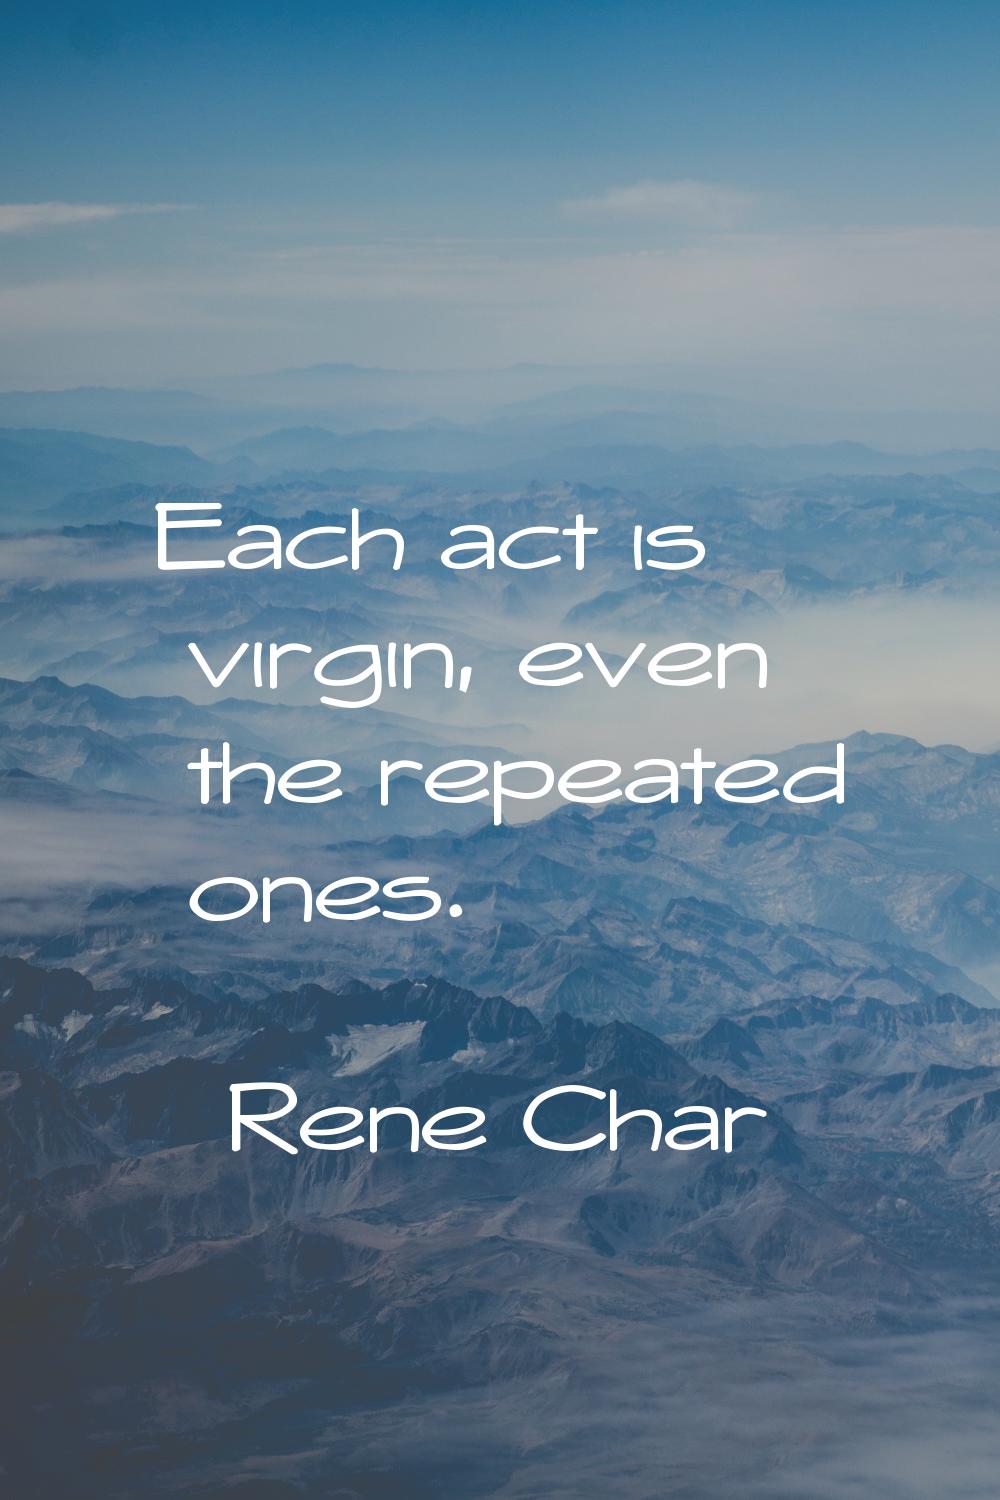 Each act is virgin, even the repeated ones.